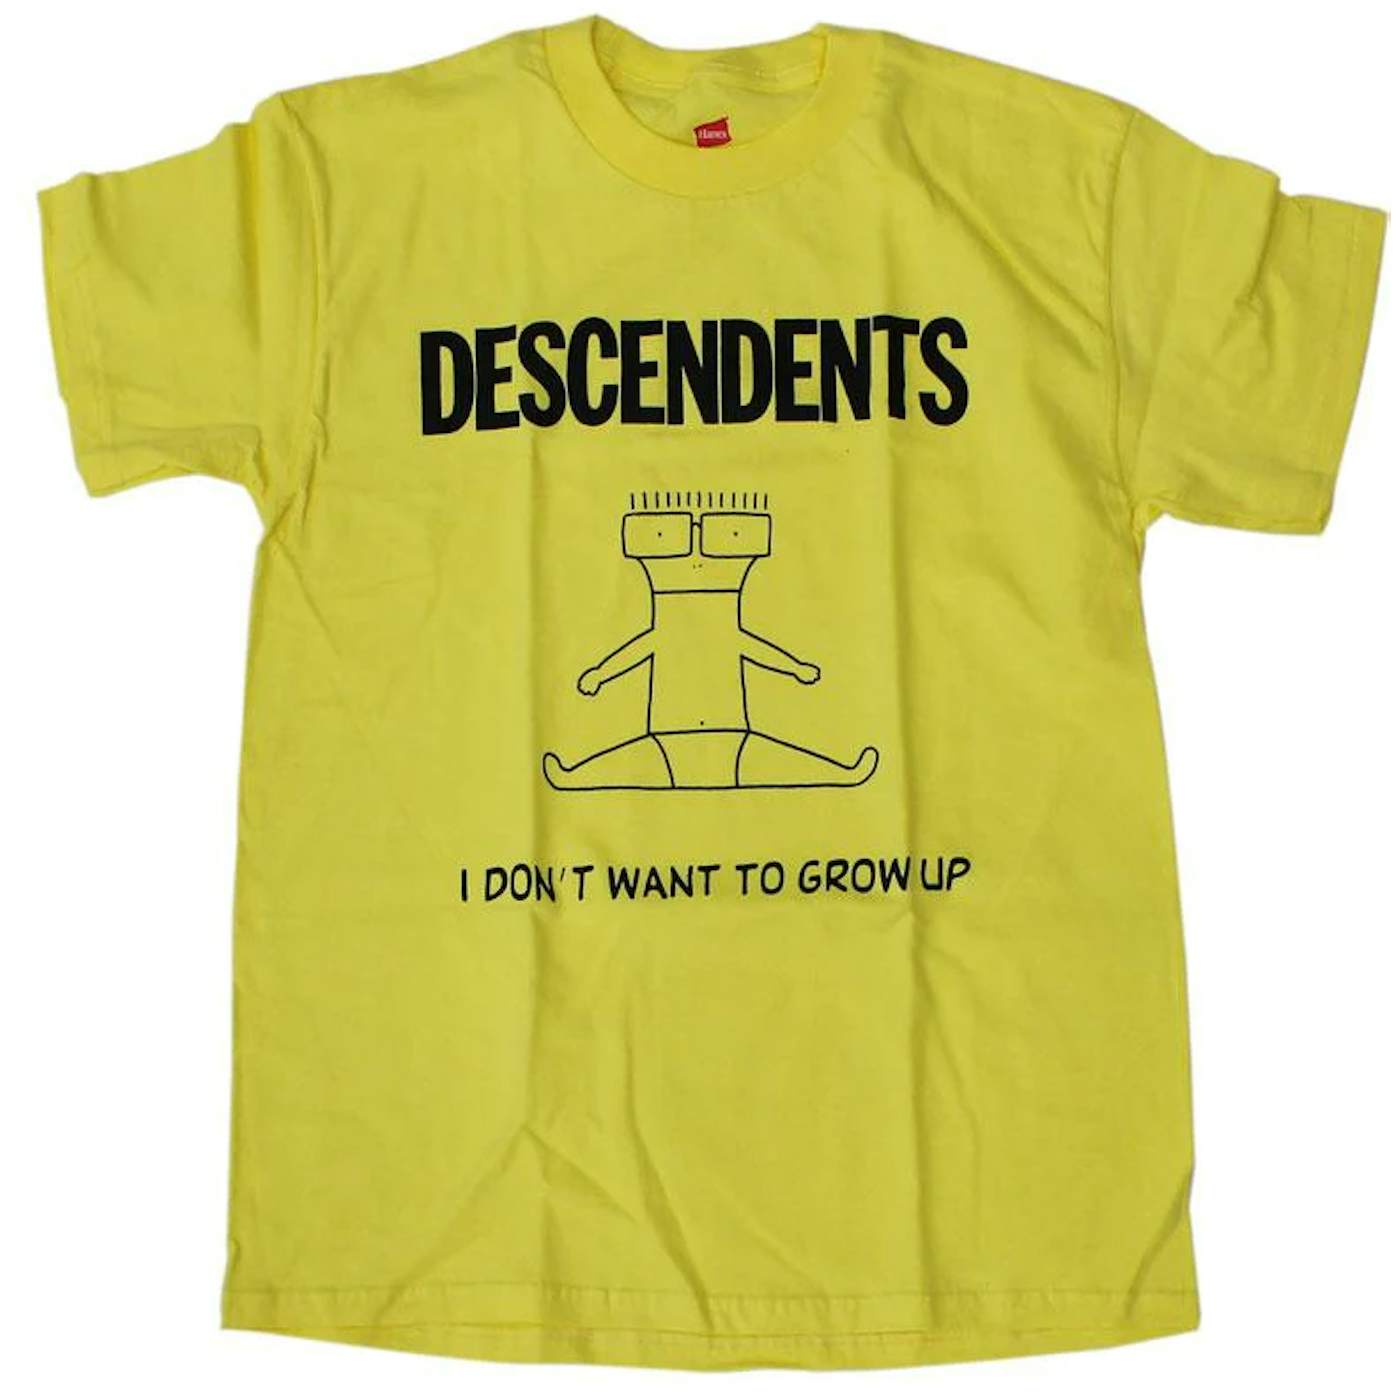  Descendents - I Don't Want To Grow Up T-shirt - XLarge